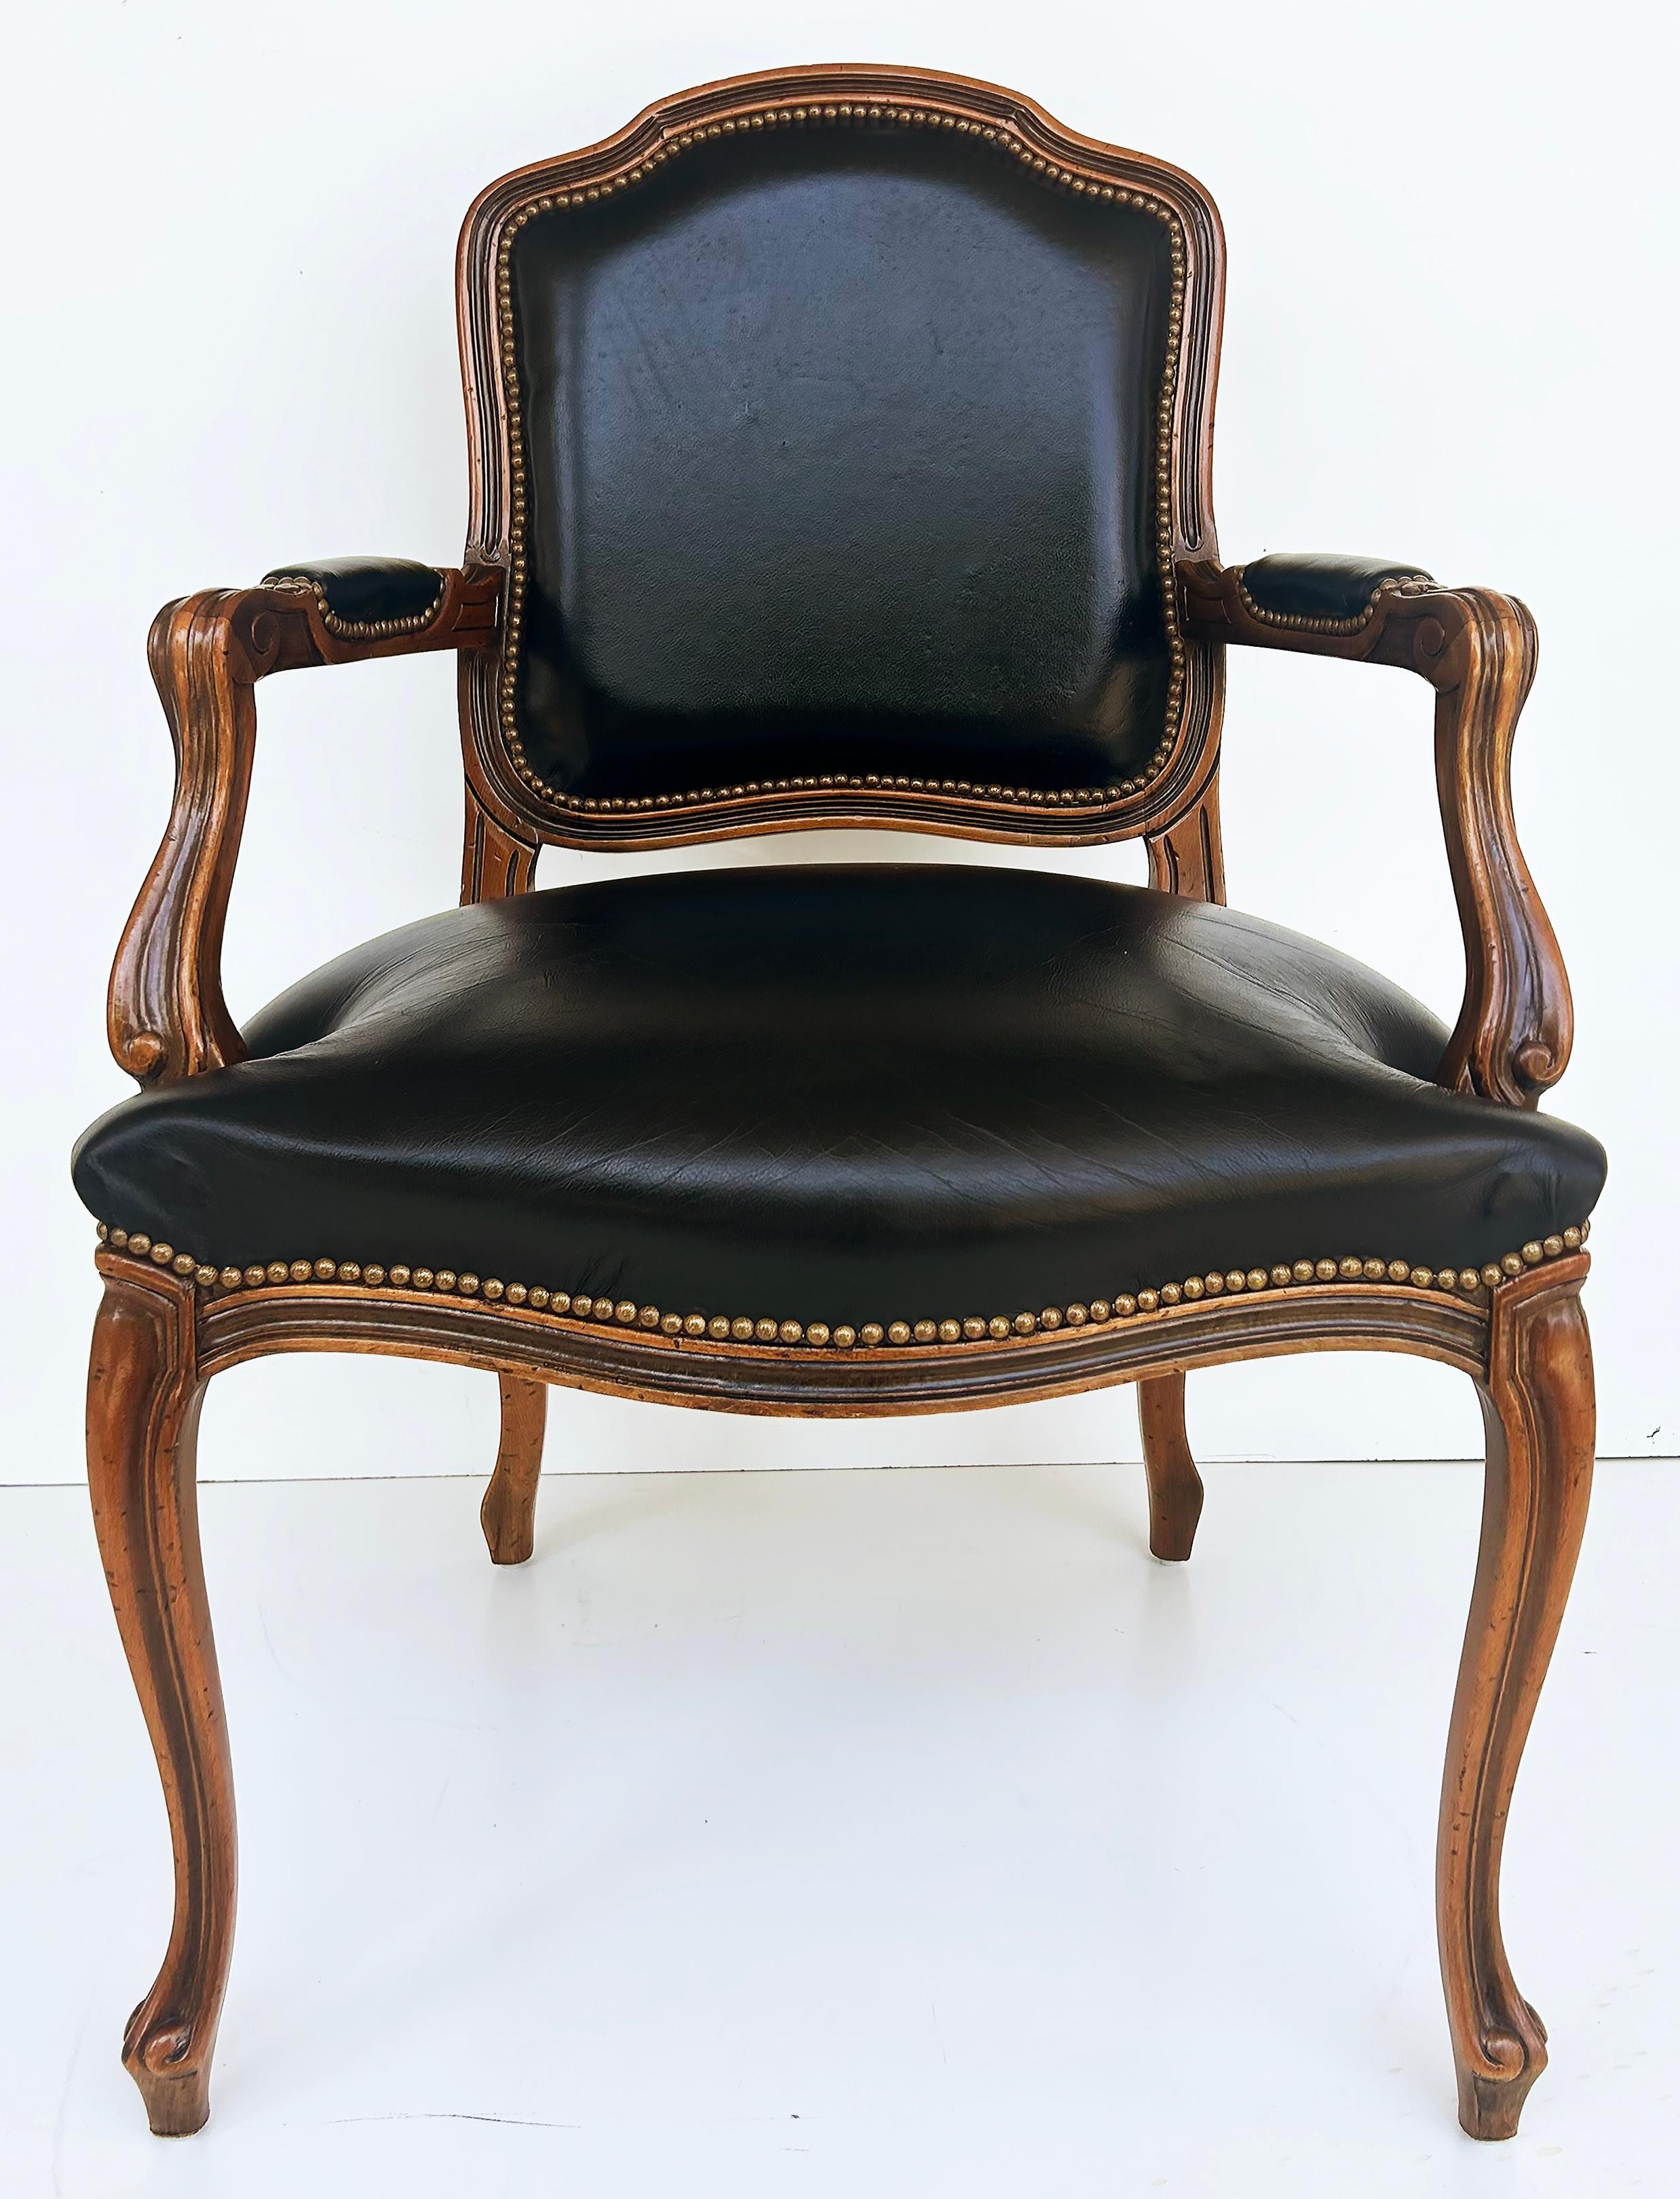 Vintage Italian Chateau D'Ax Leather Armchairs with Brass Nailhead Details, Pair

Offered for sale is a pair of Italian black leather upholstered armchairs with brass nailheads by Chateau D'Ax S.P.A. Milano. The chairs are well-made and have an